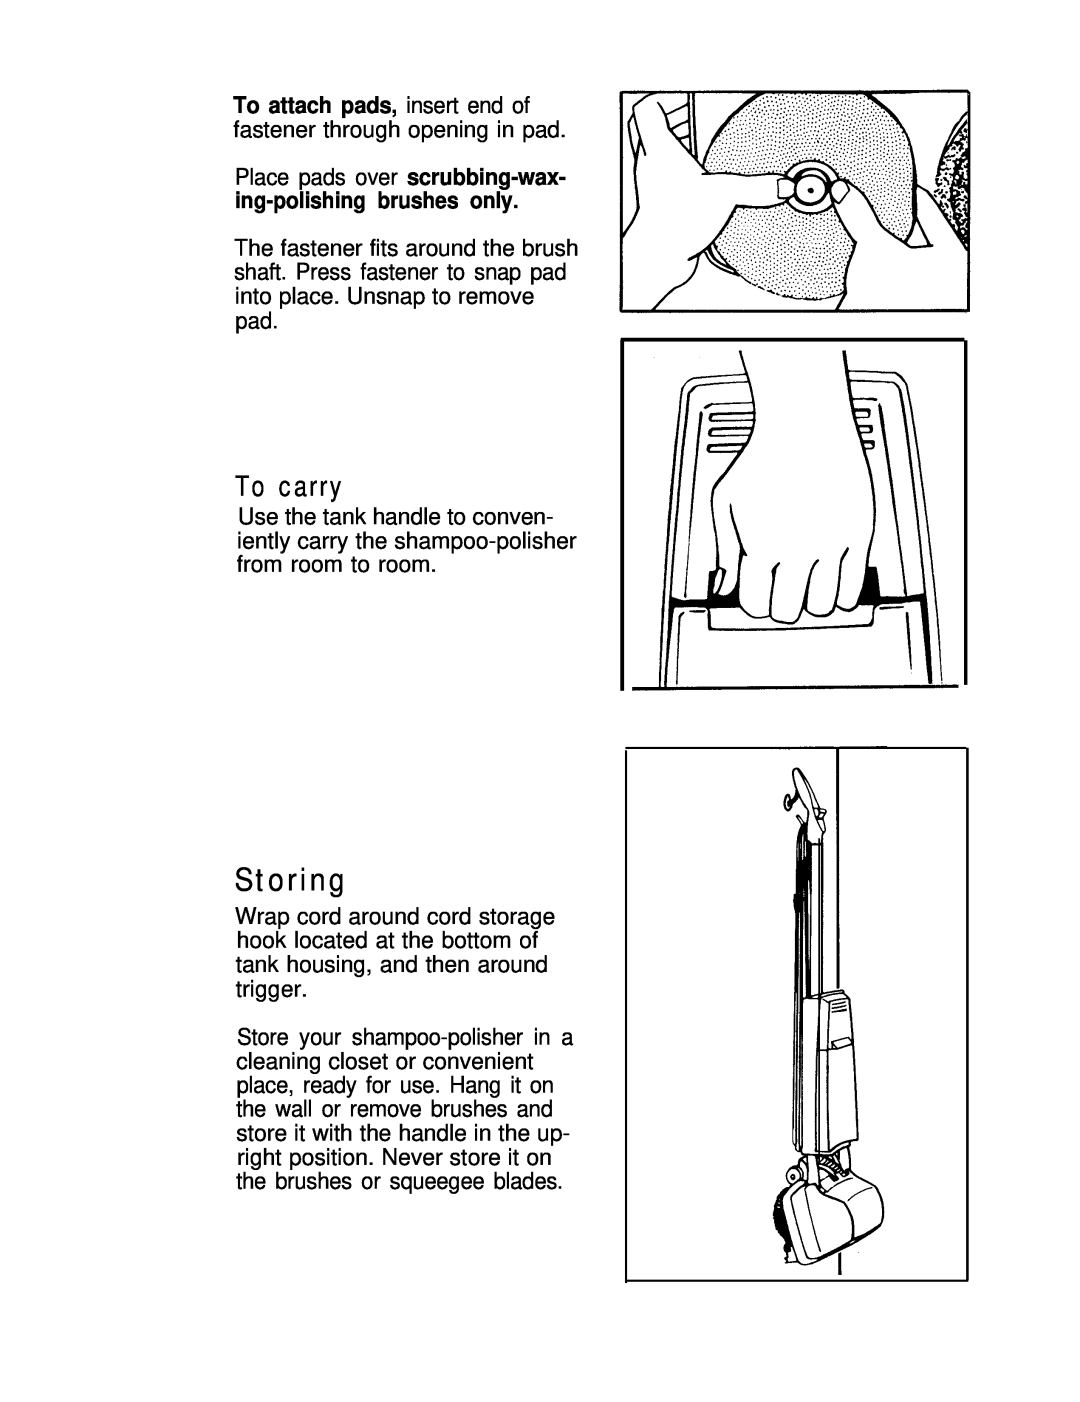 Hoover Shampoo- Polisher manual Storing, To carry 